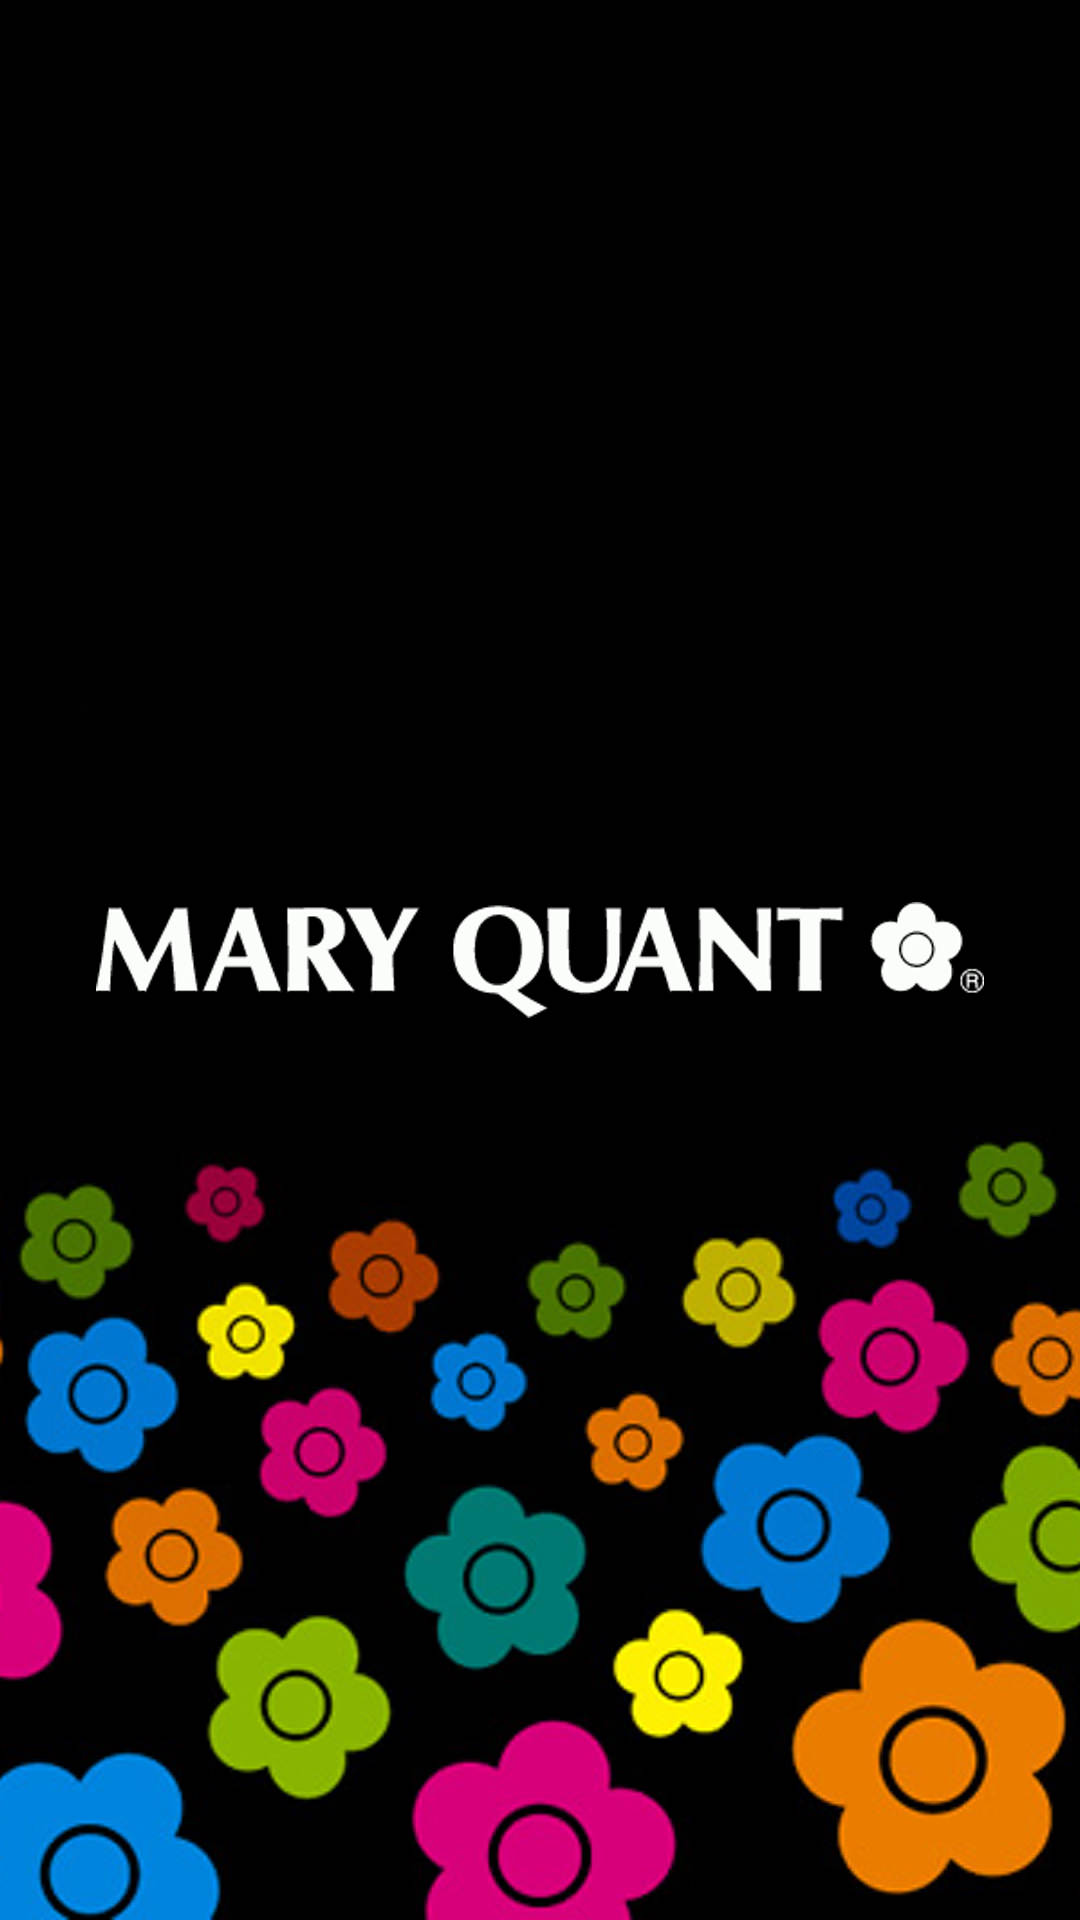 maryquant i03 - MARY QUANT[マリー・クヮント]の高画質スマホ壁紙20枚 [iPhone＆Androidに対応]